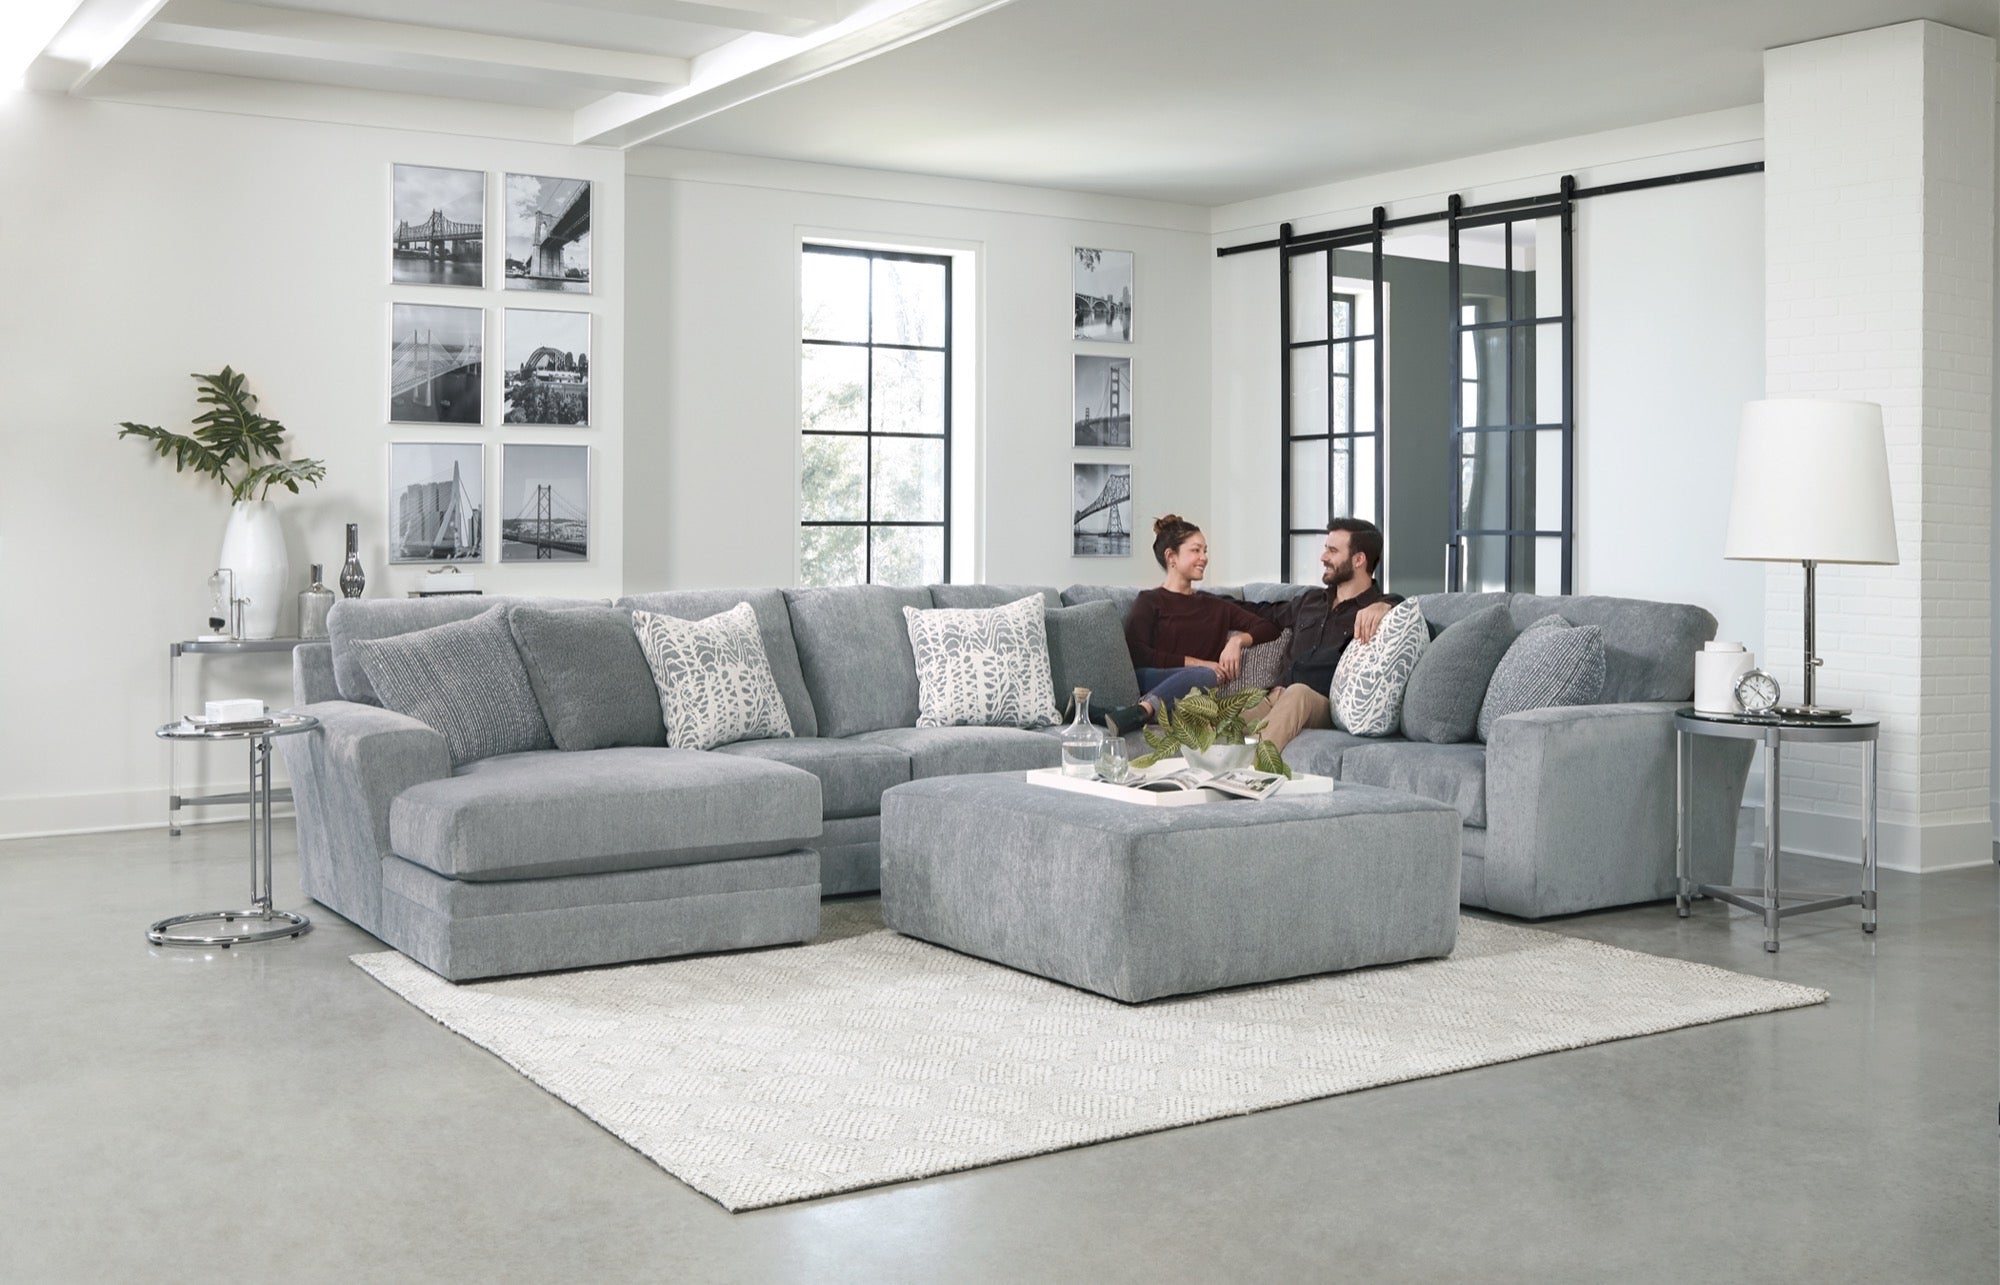 Glacier 4 Piece Sectional with Comfort Coil Seating